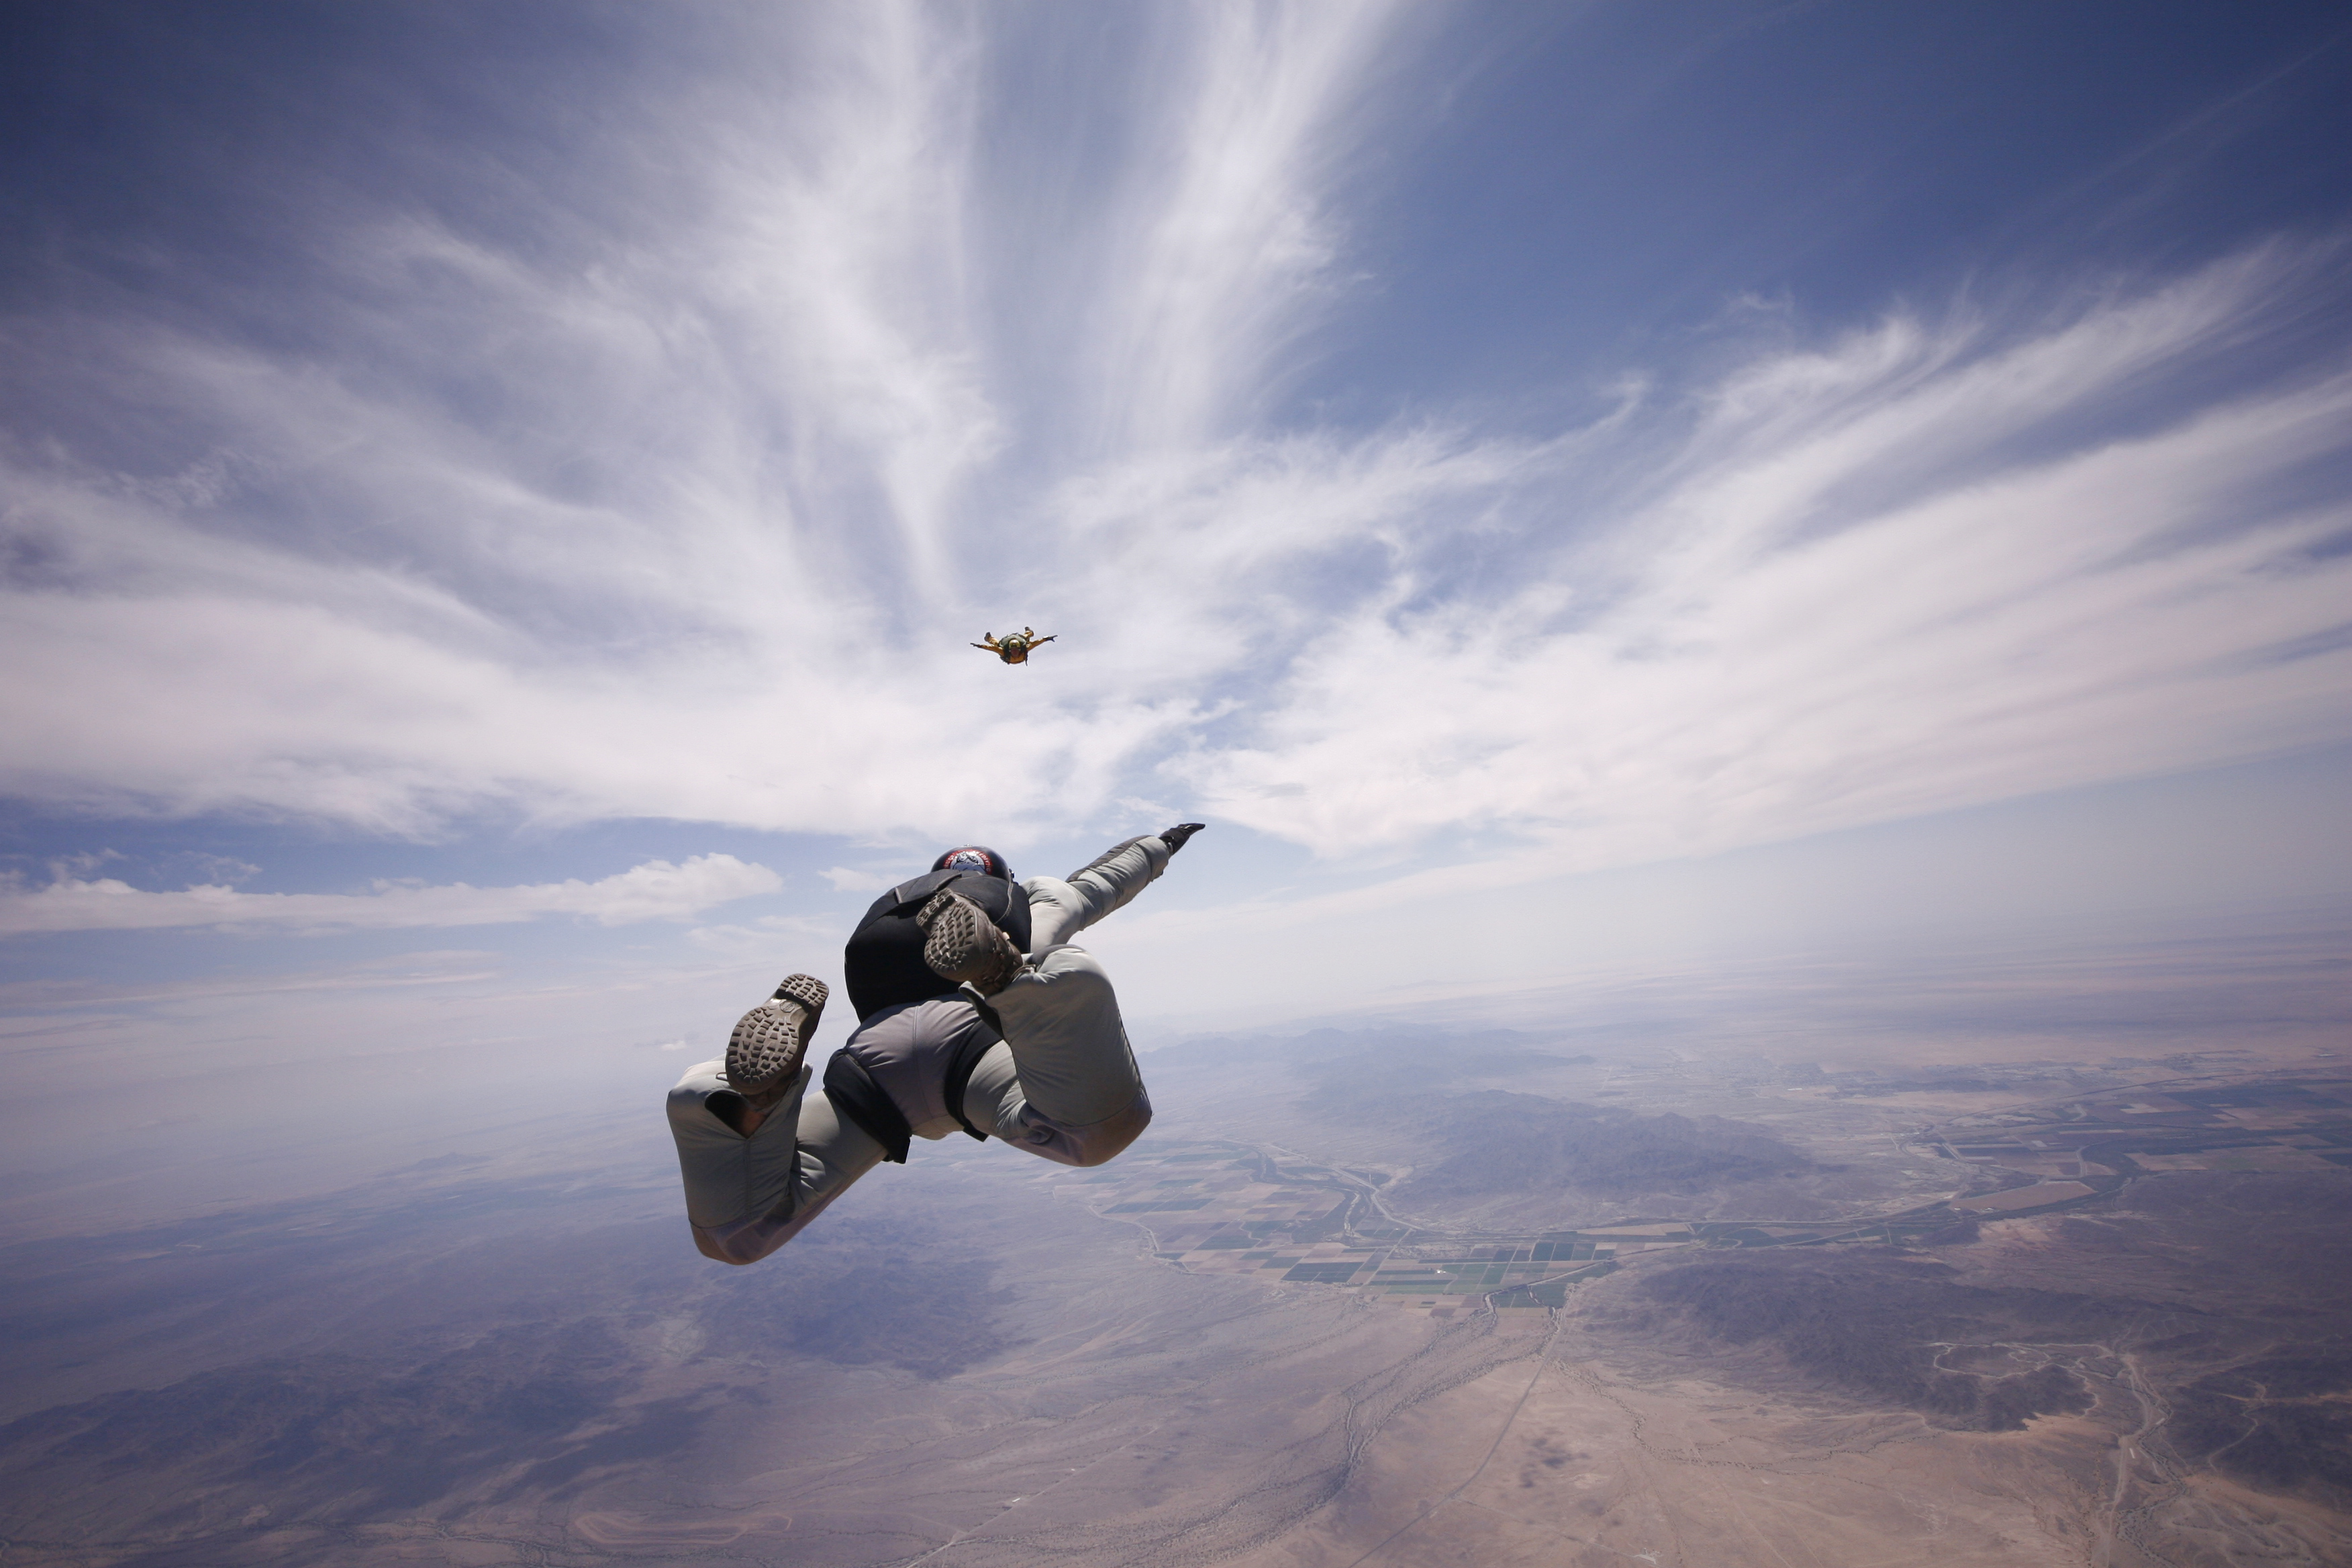 Soldiers assigned to the Military Freefall School conduct freefall operations at Yuma Proving Ground by U.S. Army John F. Kennedy Special Warfare Center and School